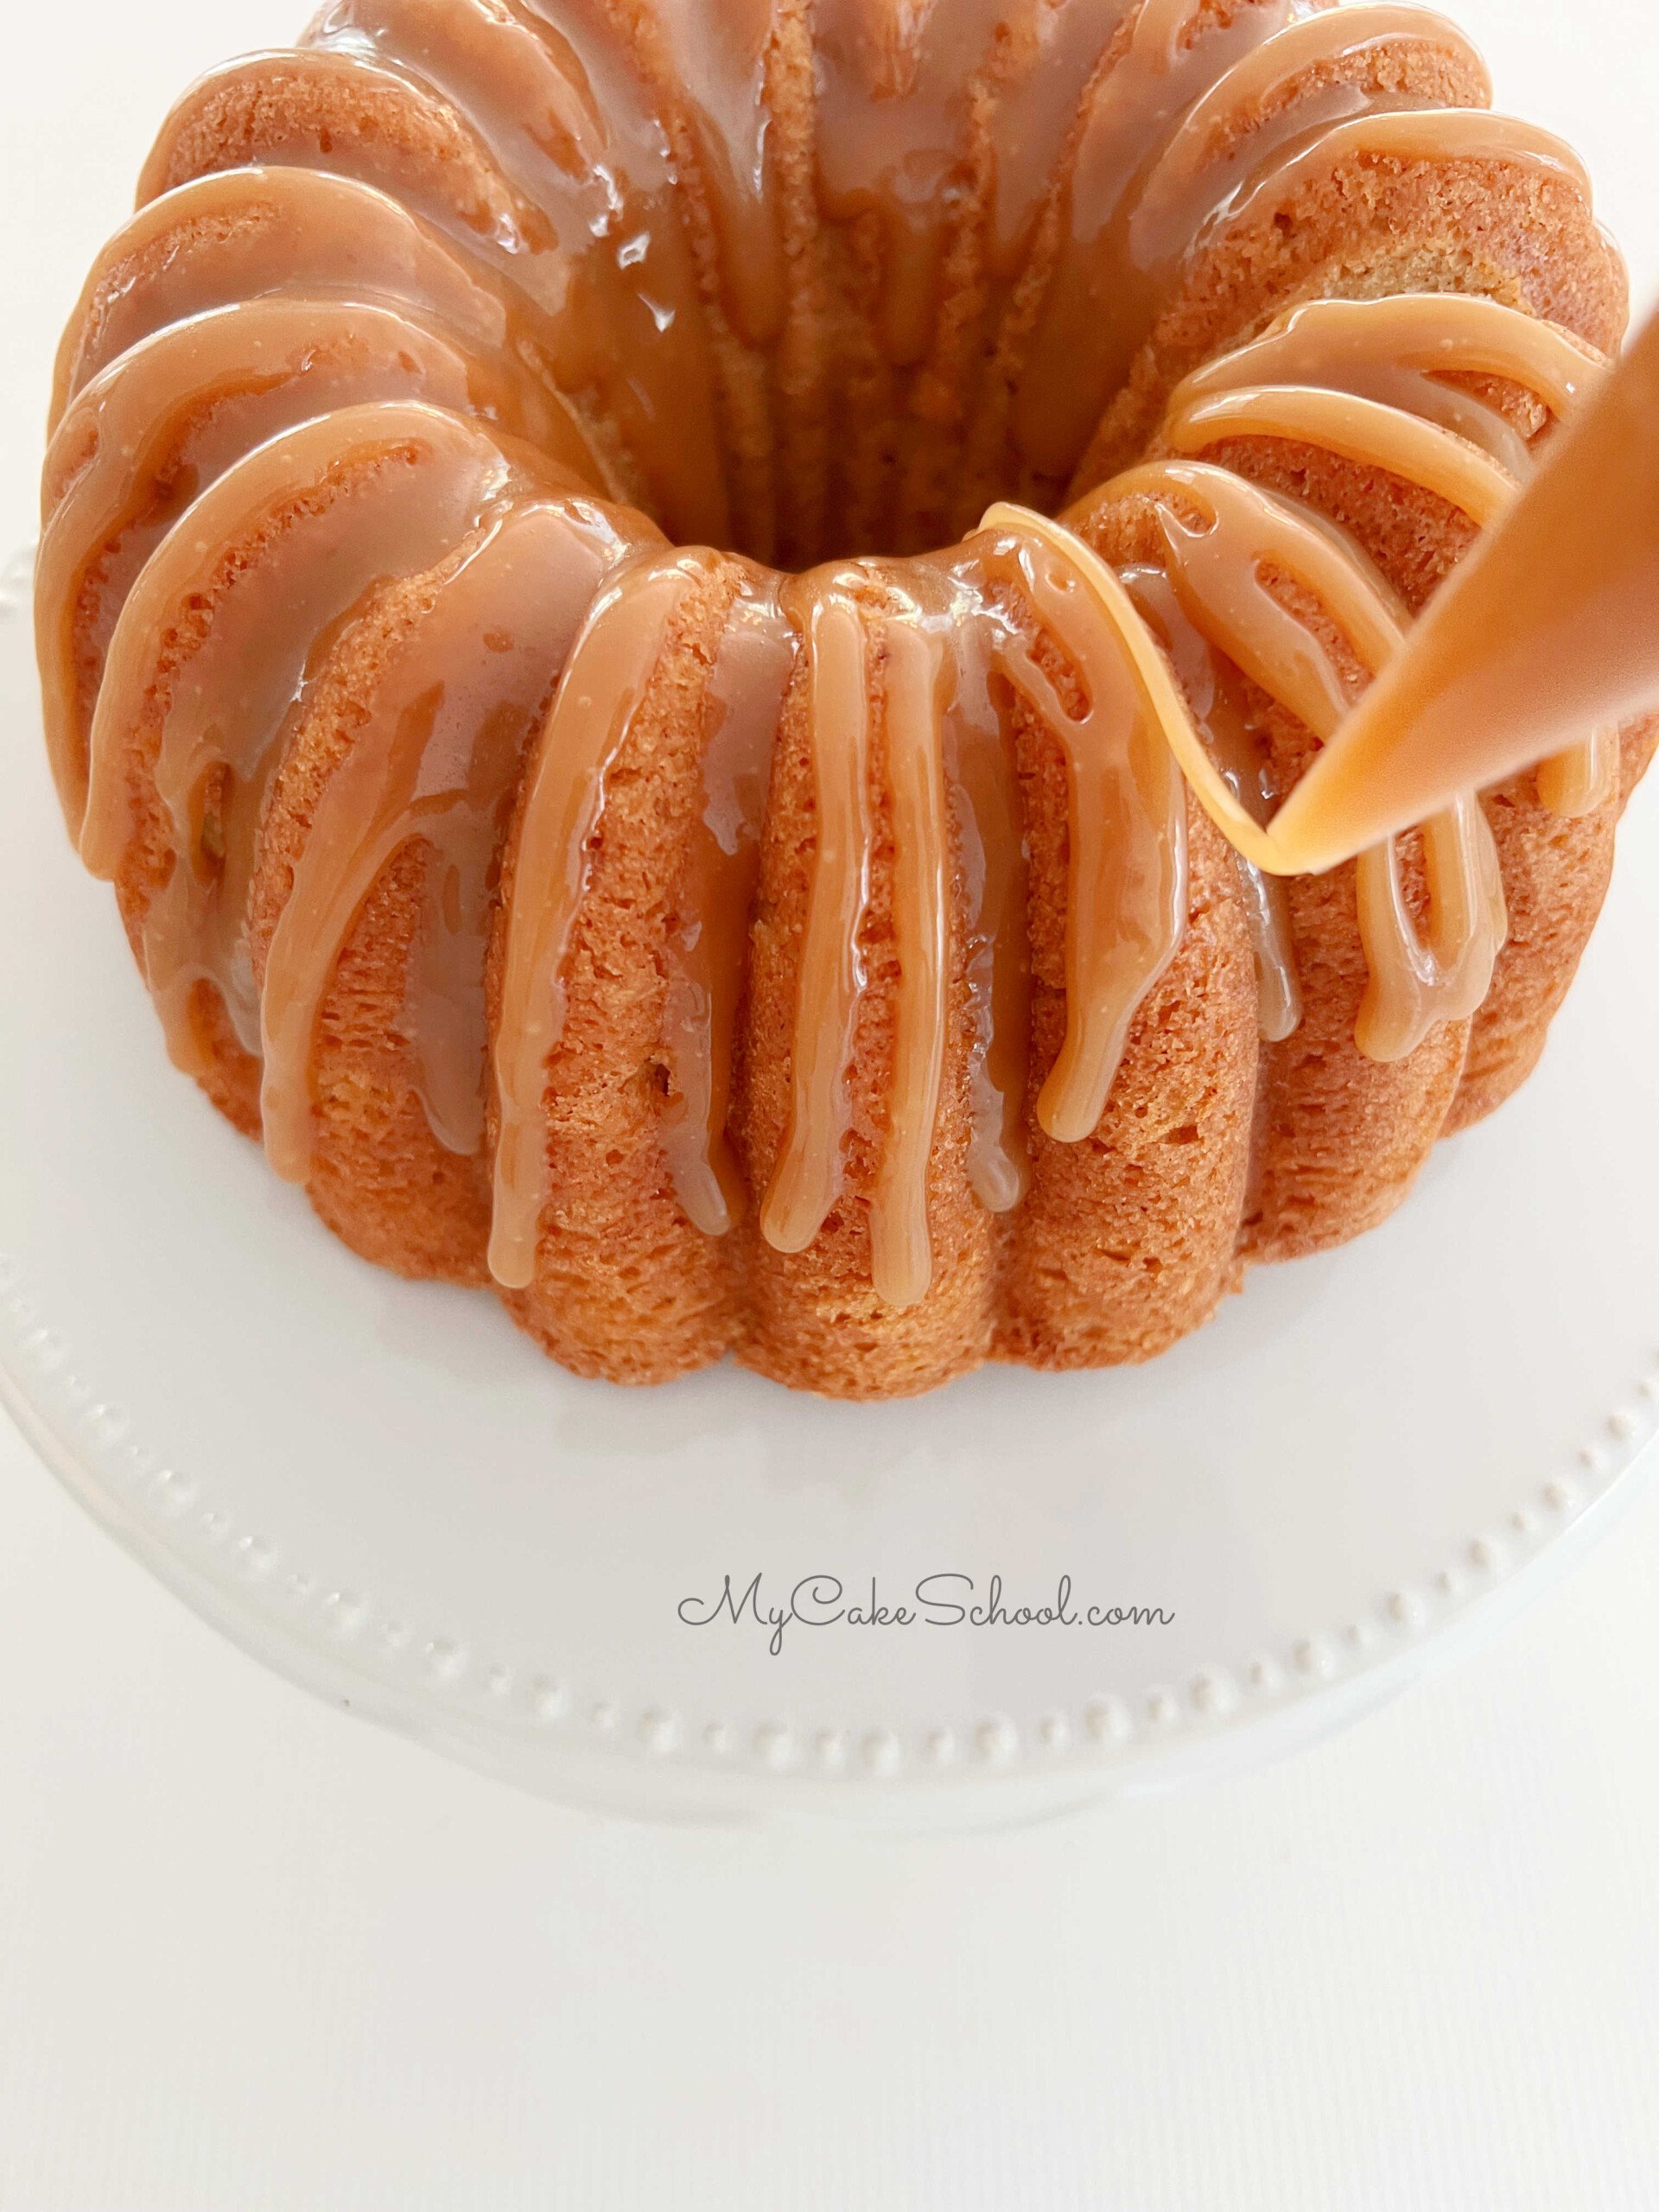 Drizzling Apple Bundt Cake with simple caramel glaze, using a piping bag with the tip snipped away.